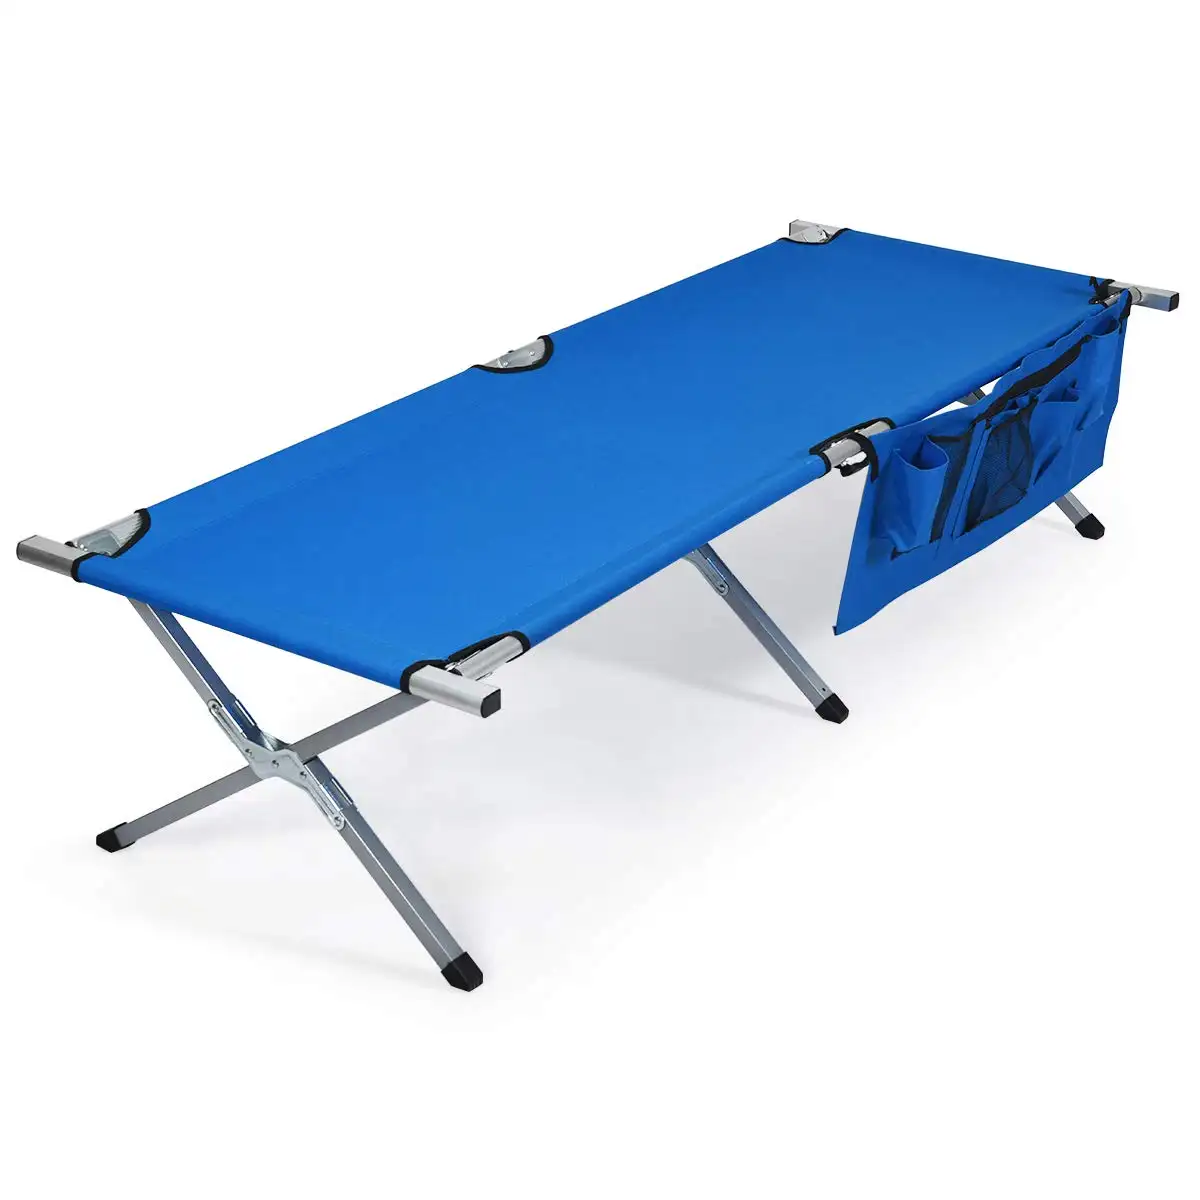 Outdoor foldable camping cot bed with carry bag for traveling hiking cheap in bulk wholesale folding camping bed